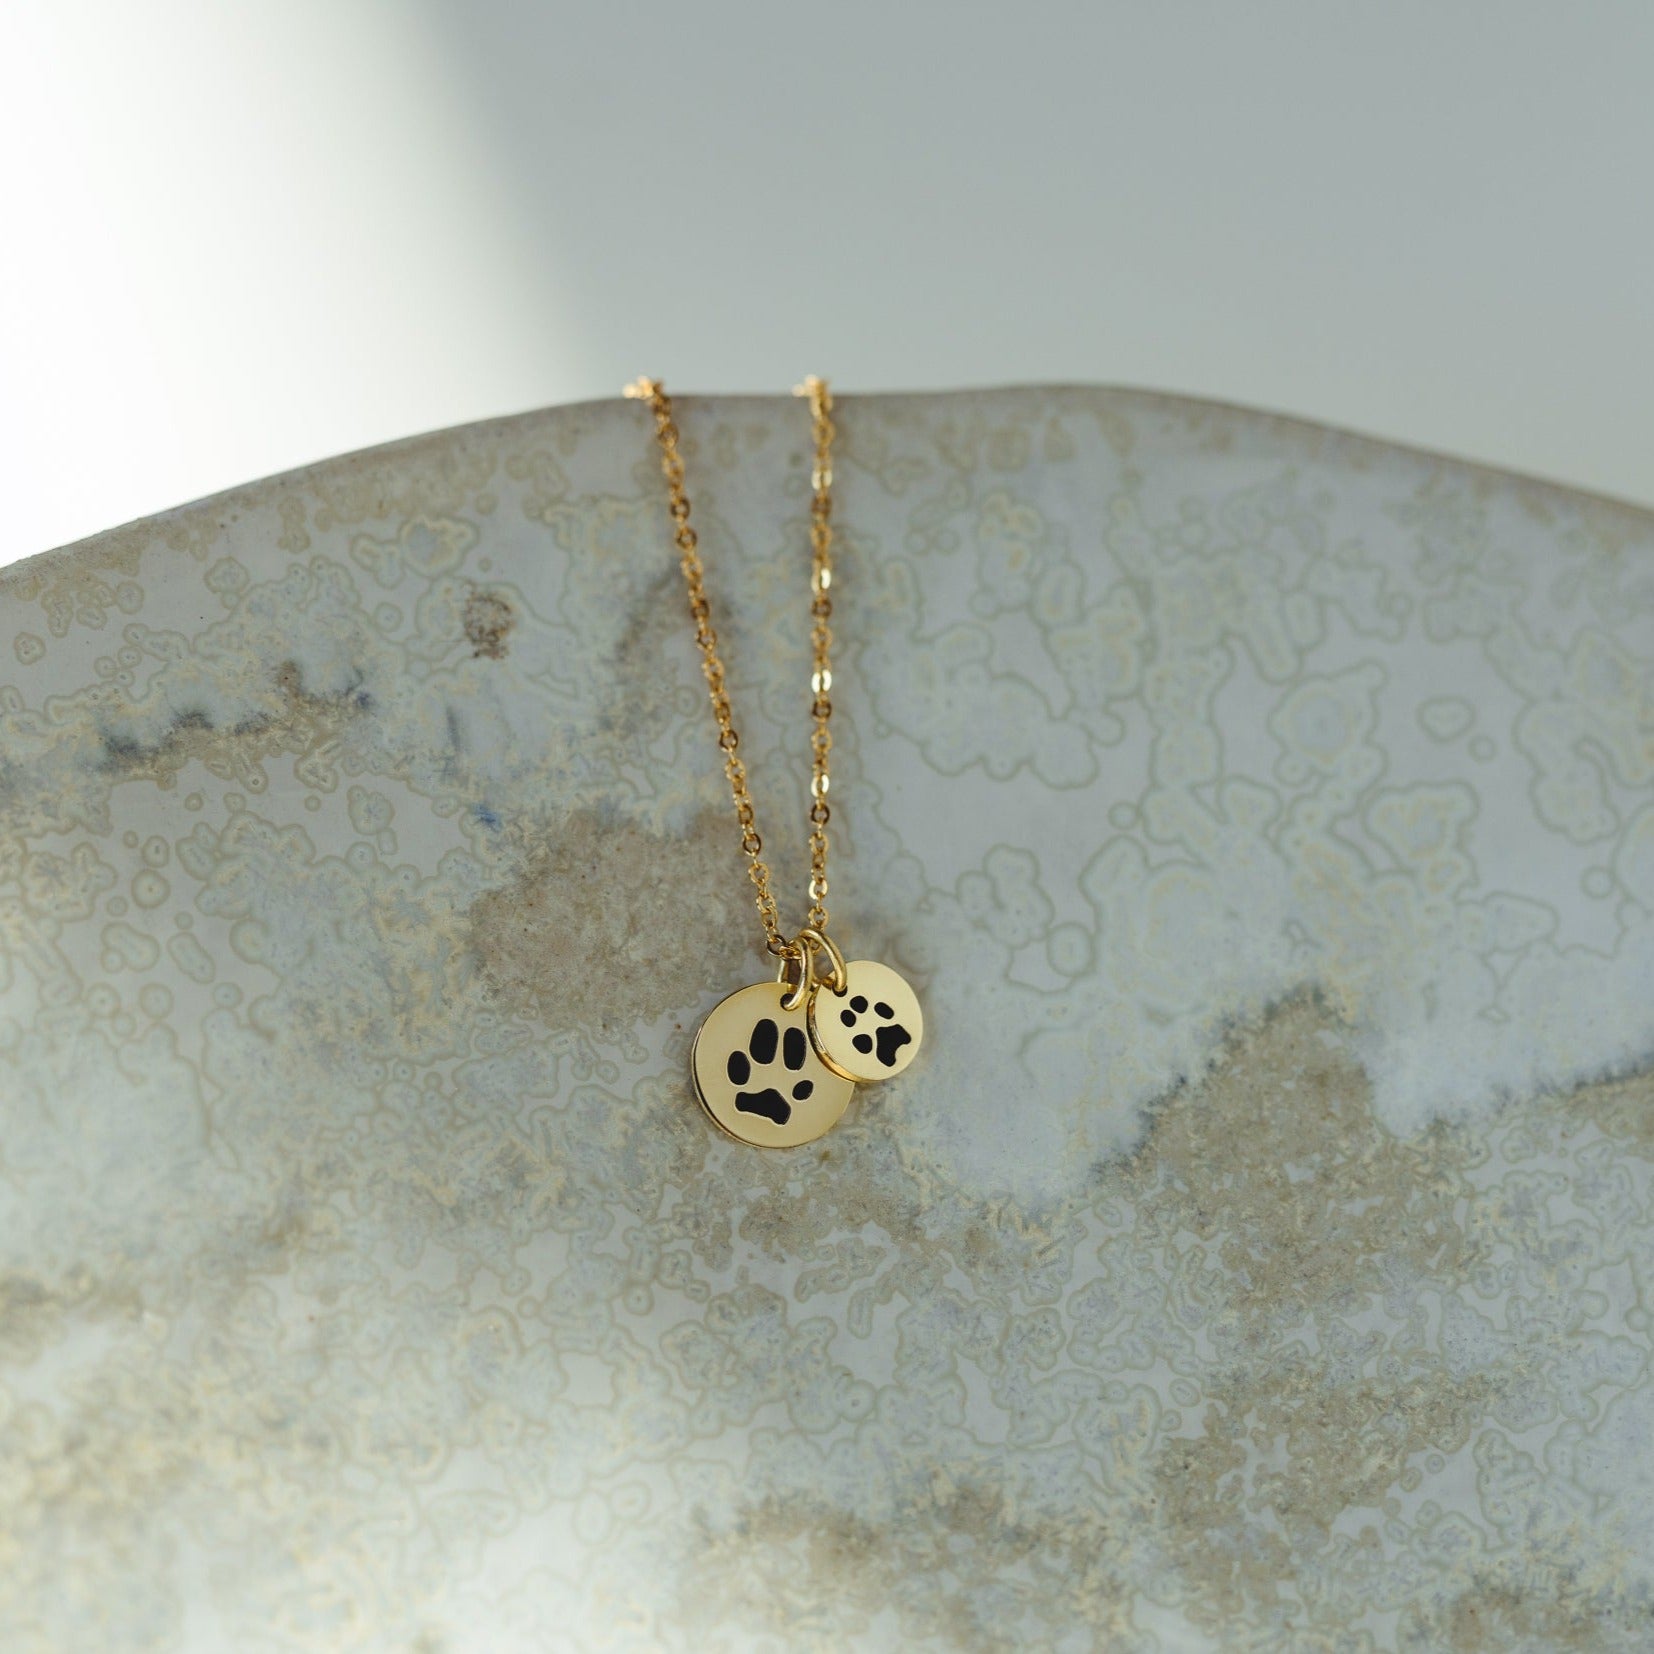 Paw Print Necklace – Clare Swan Designs